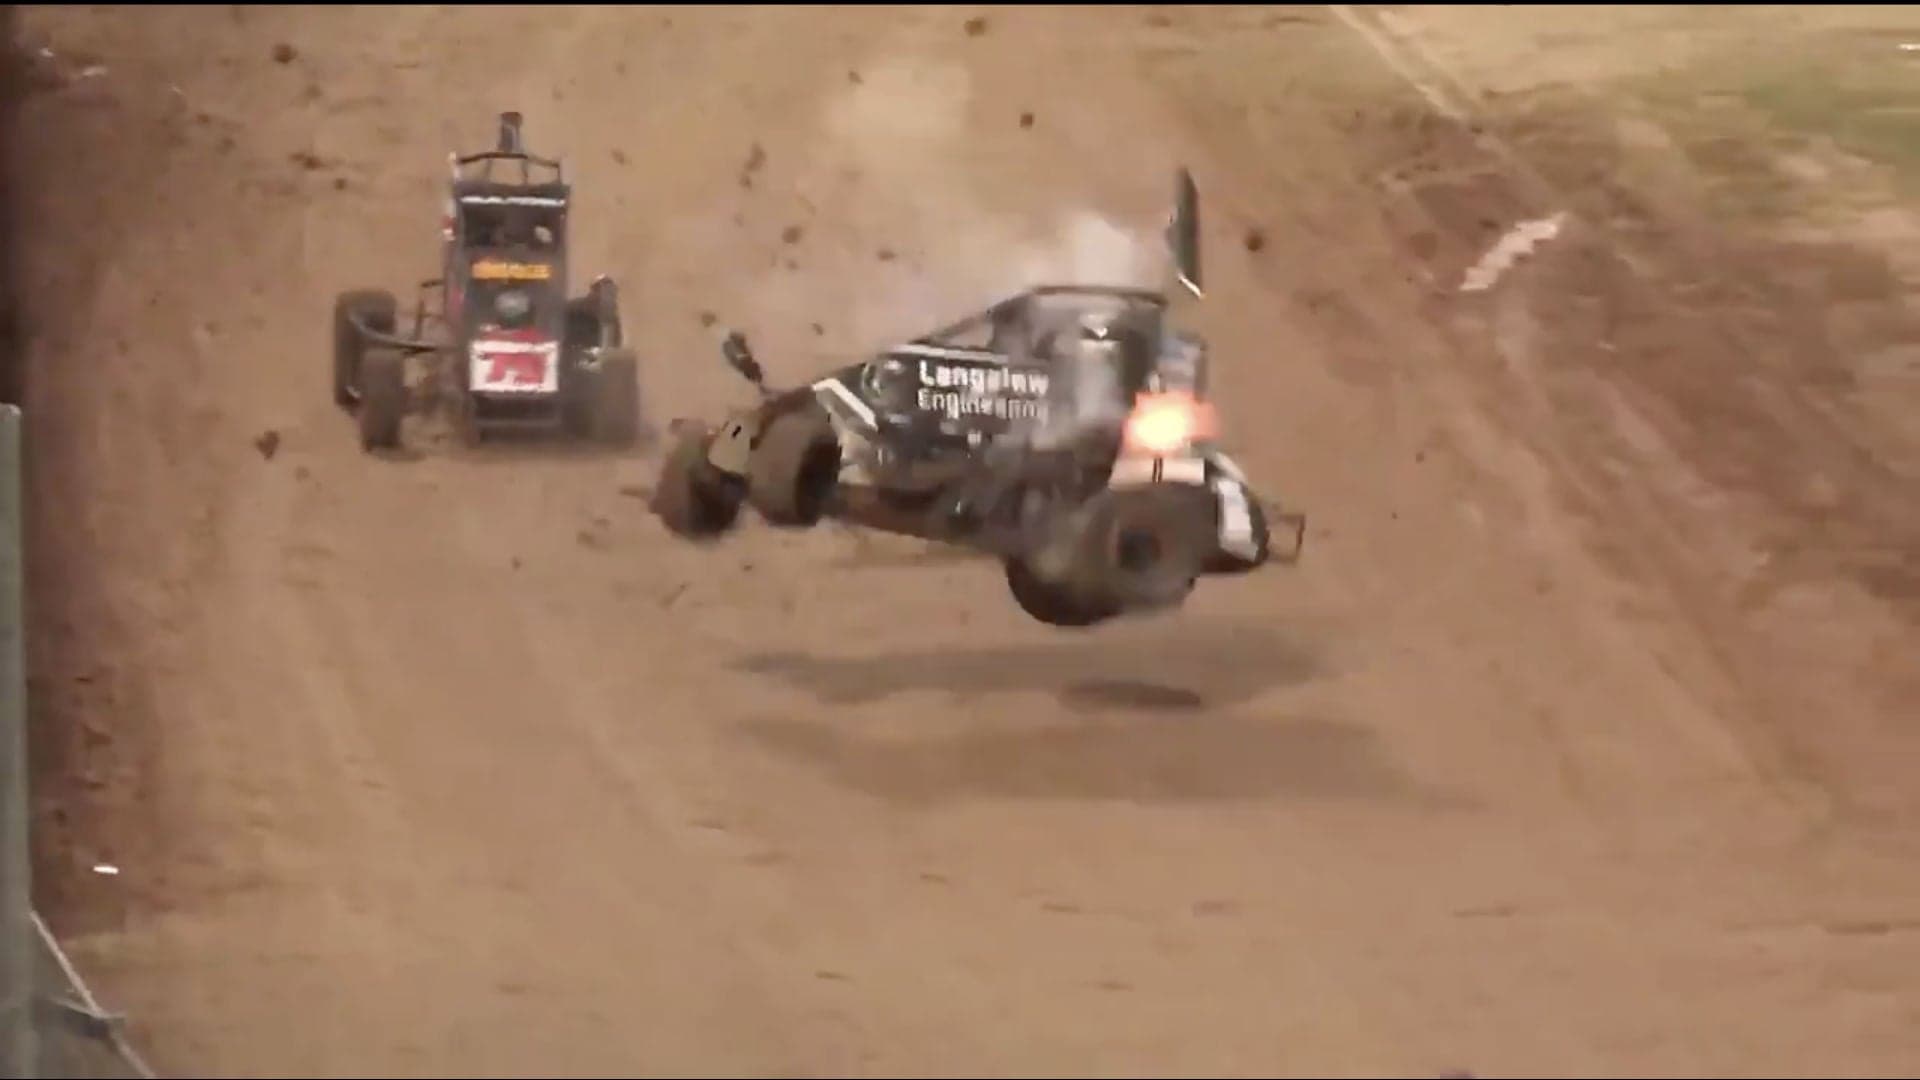 Watch a Midget Race Car Barrel-Roll More Than 10 Times After Sliding Out of Control